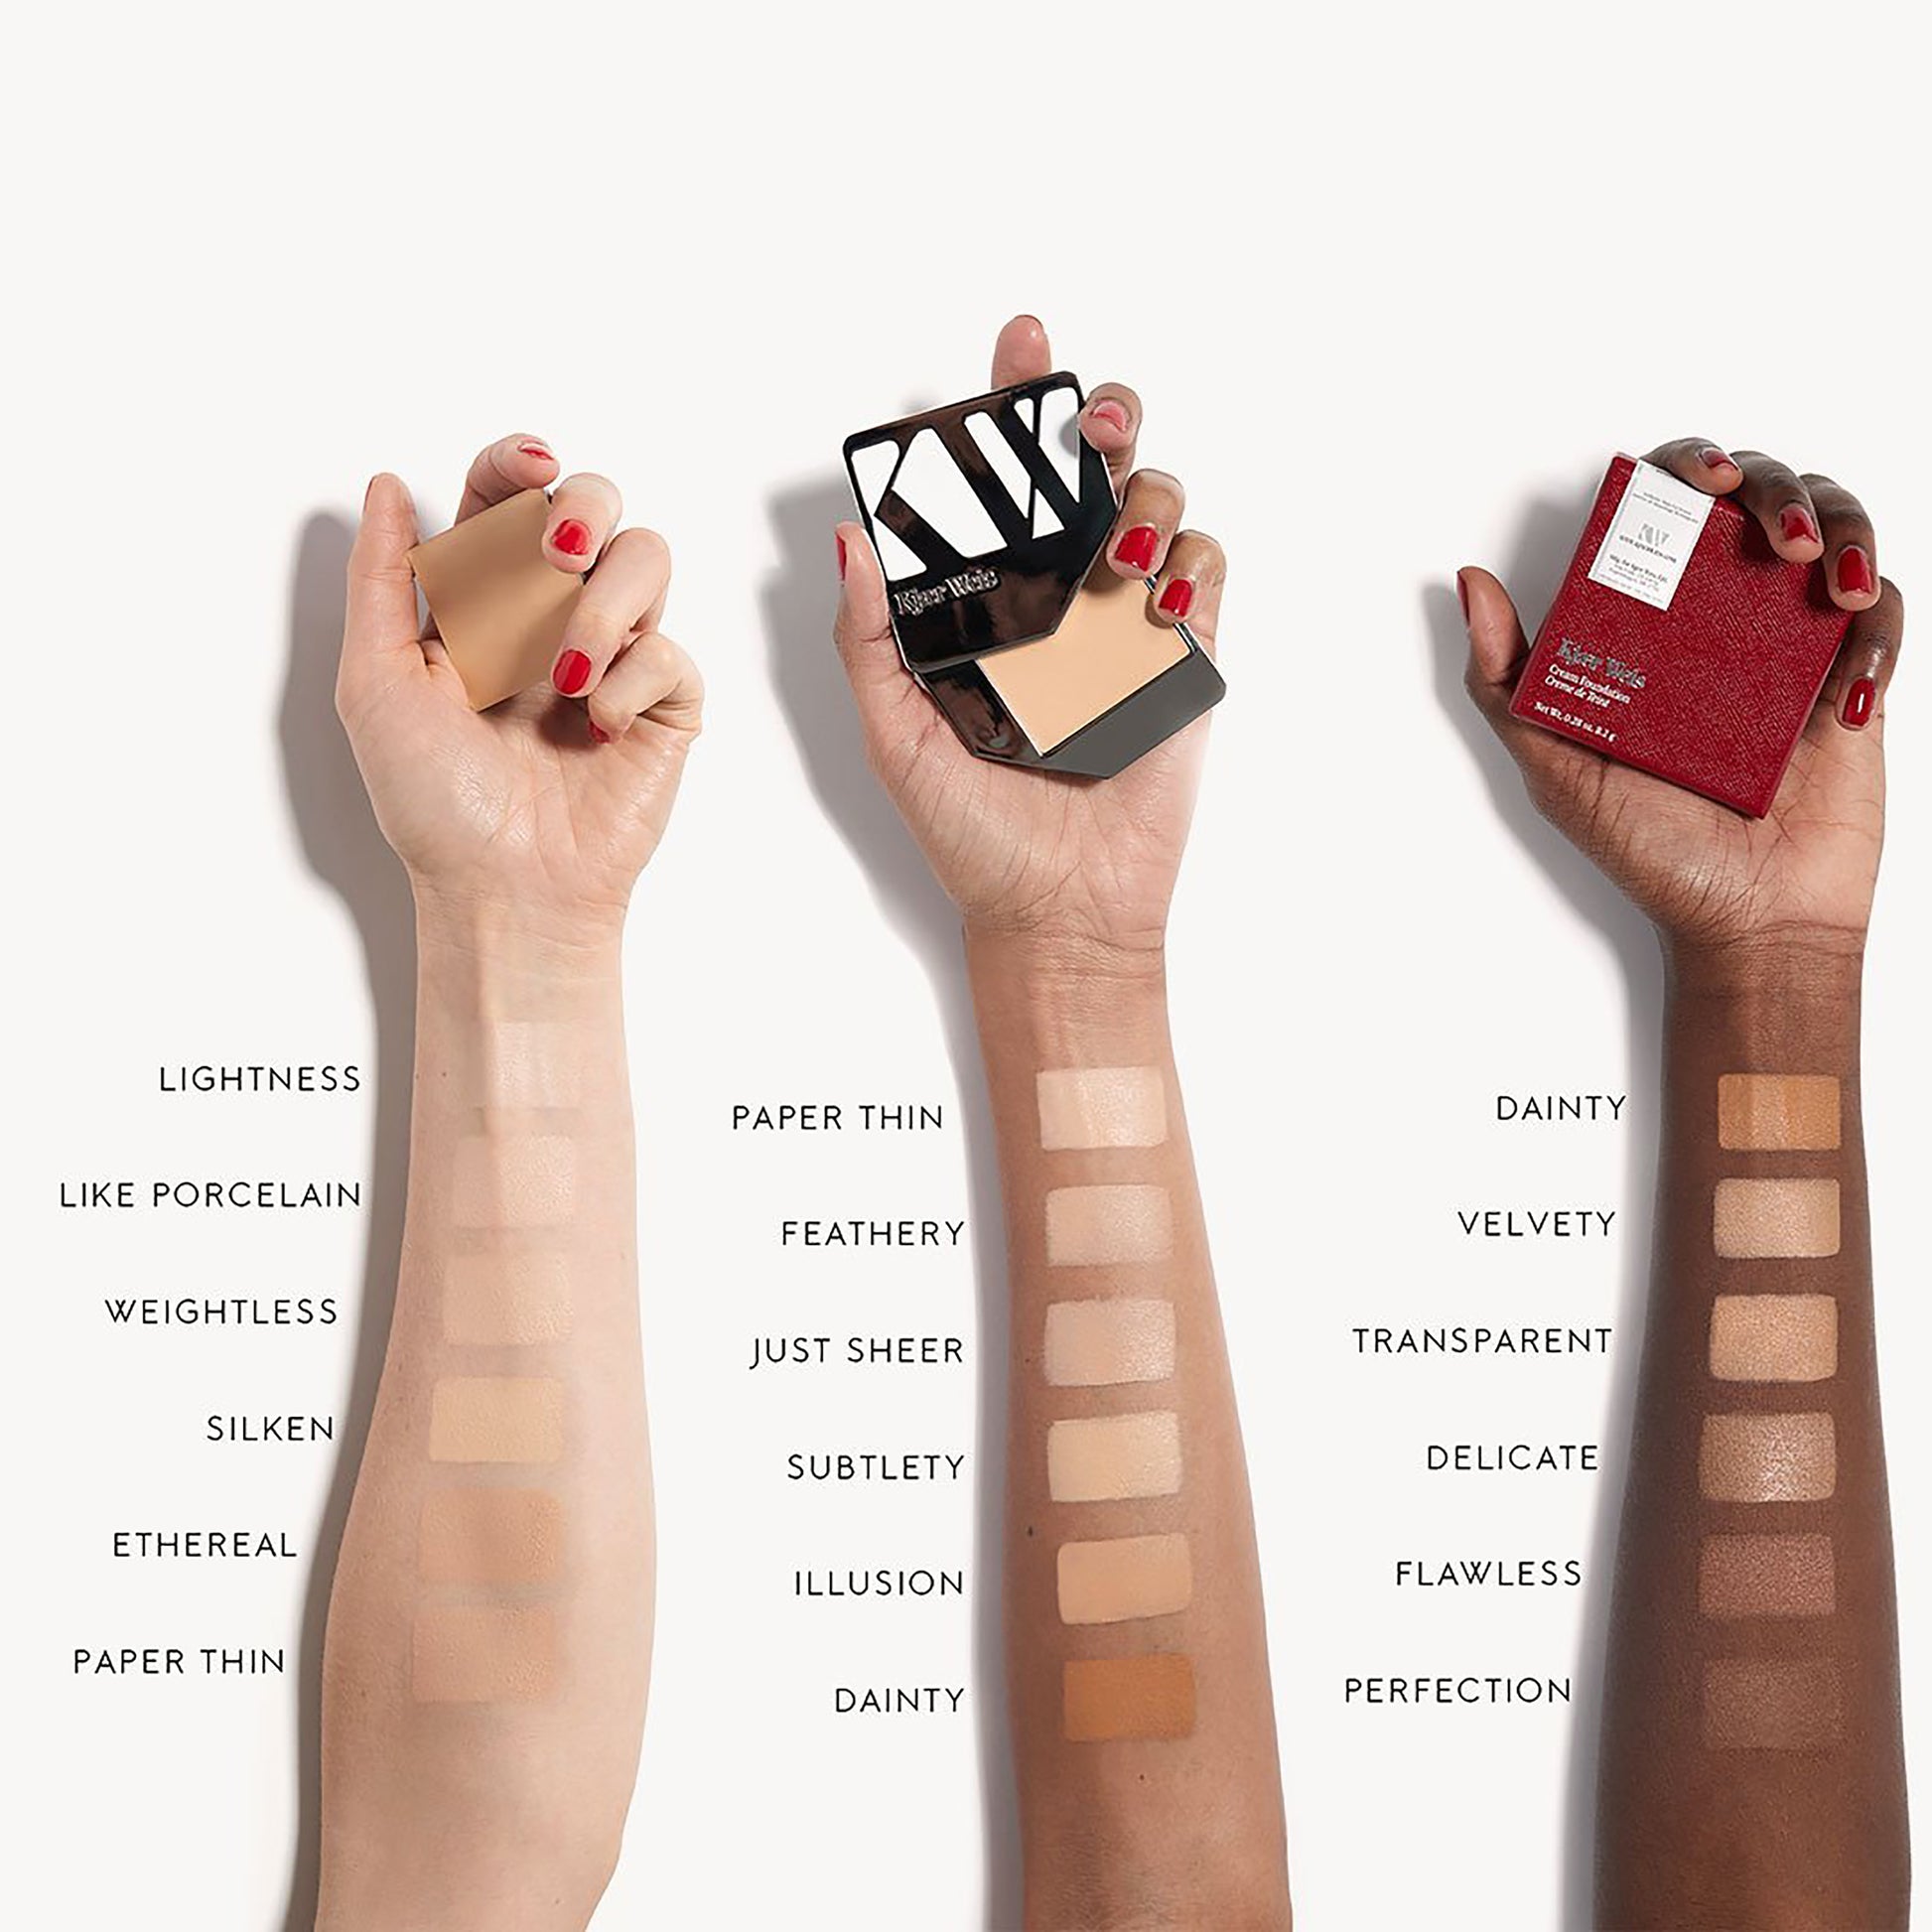 three arms of three different skin tones all with a swatch of cream foundation from darkest to lightest shade. perfection is the darkest shade on the deepest skin tone.  